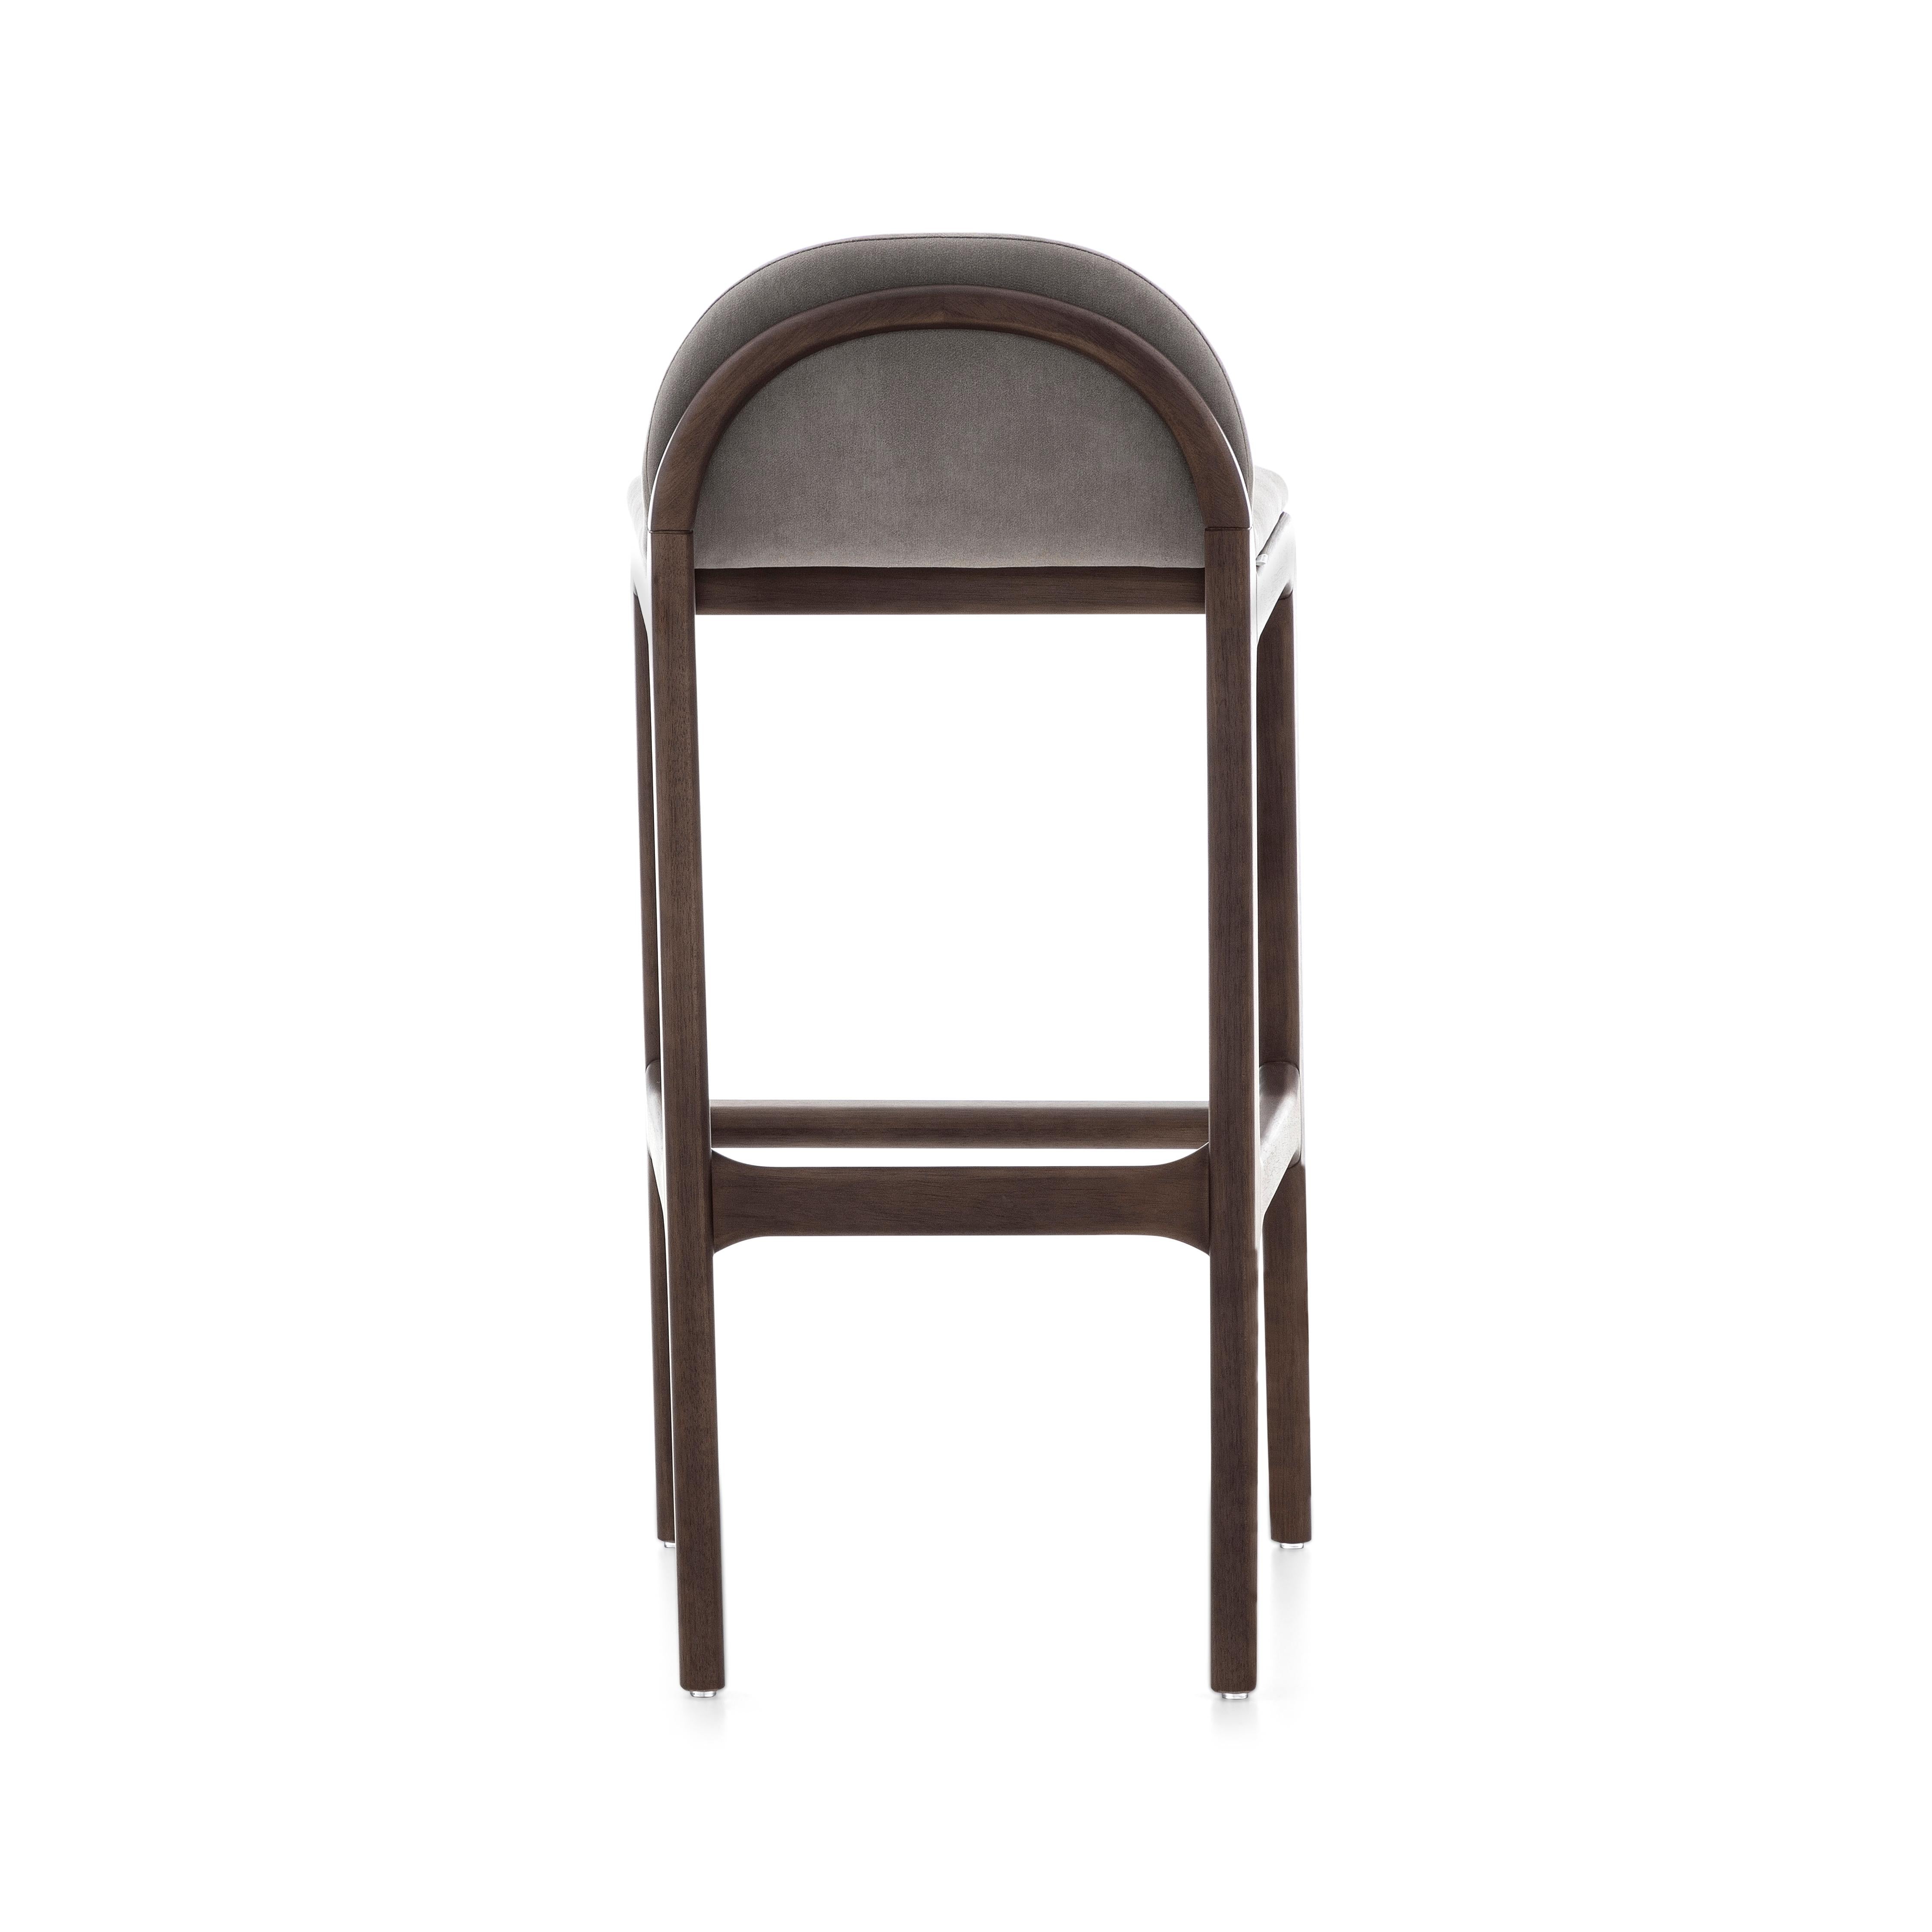 Brazilian Ura Counter Barstool in Walnut Wood Finish Base and Upholstered Light Brown Seat For Sale